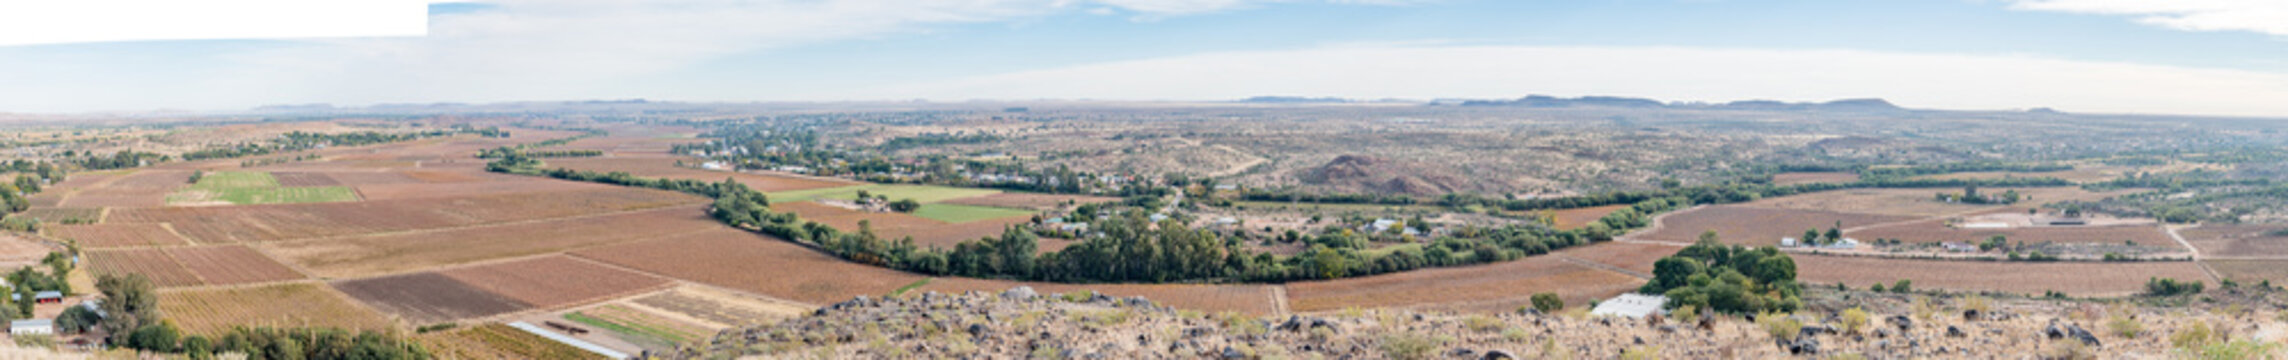 Panoramic view of Keimoes and vineyards as seen from Tierberg